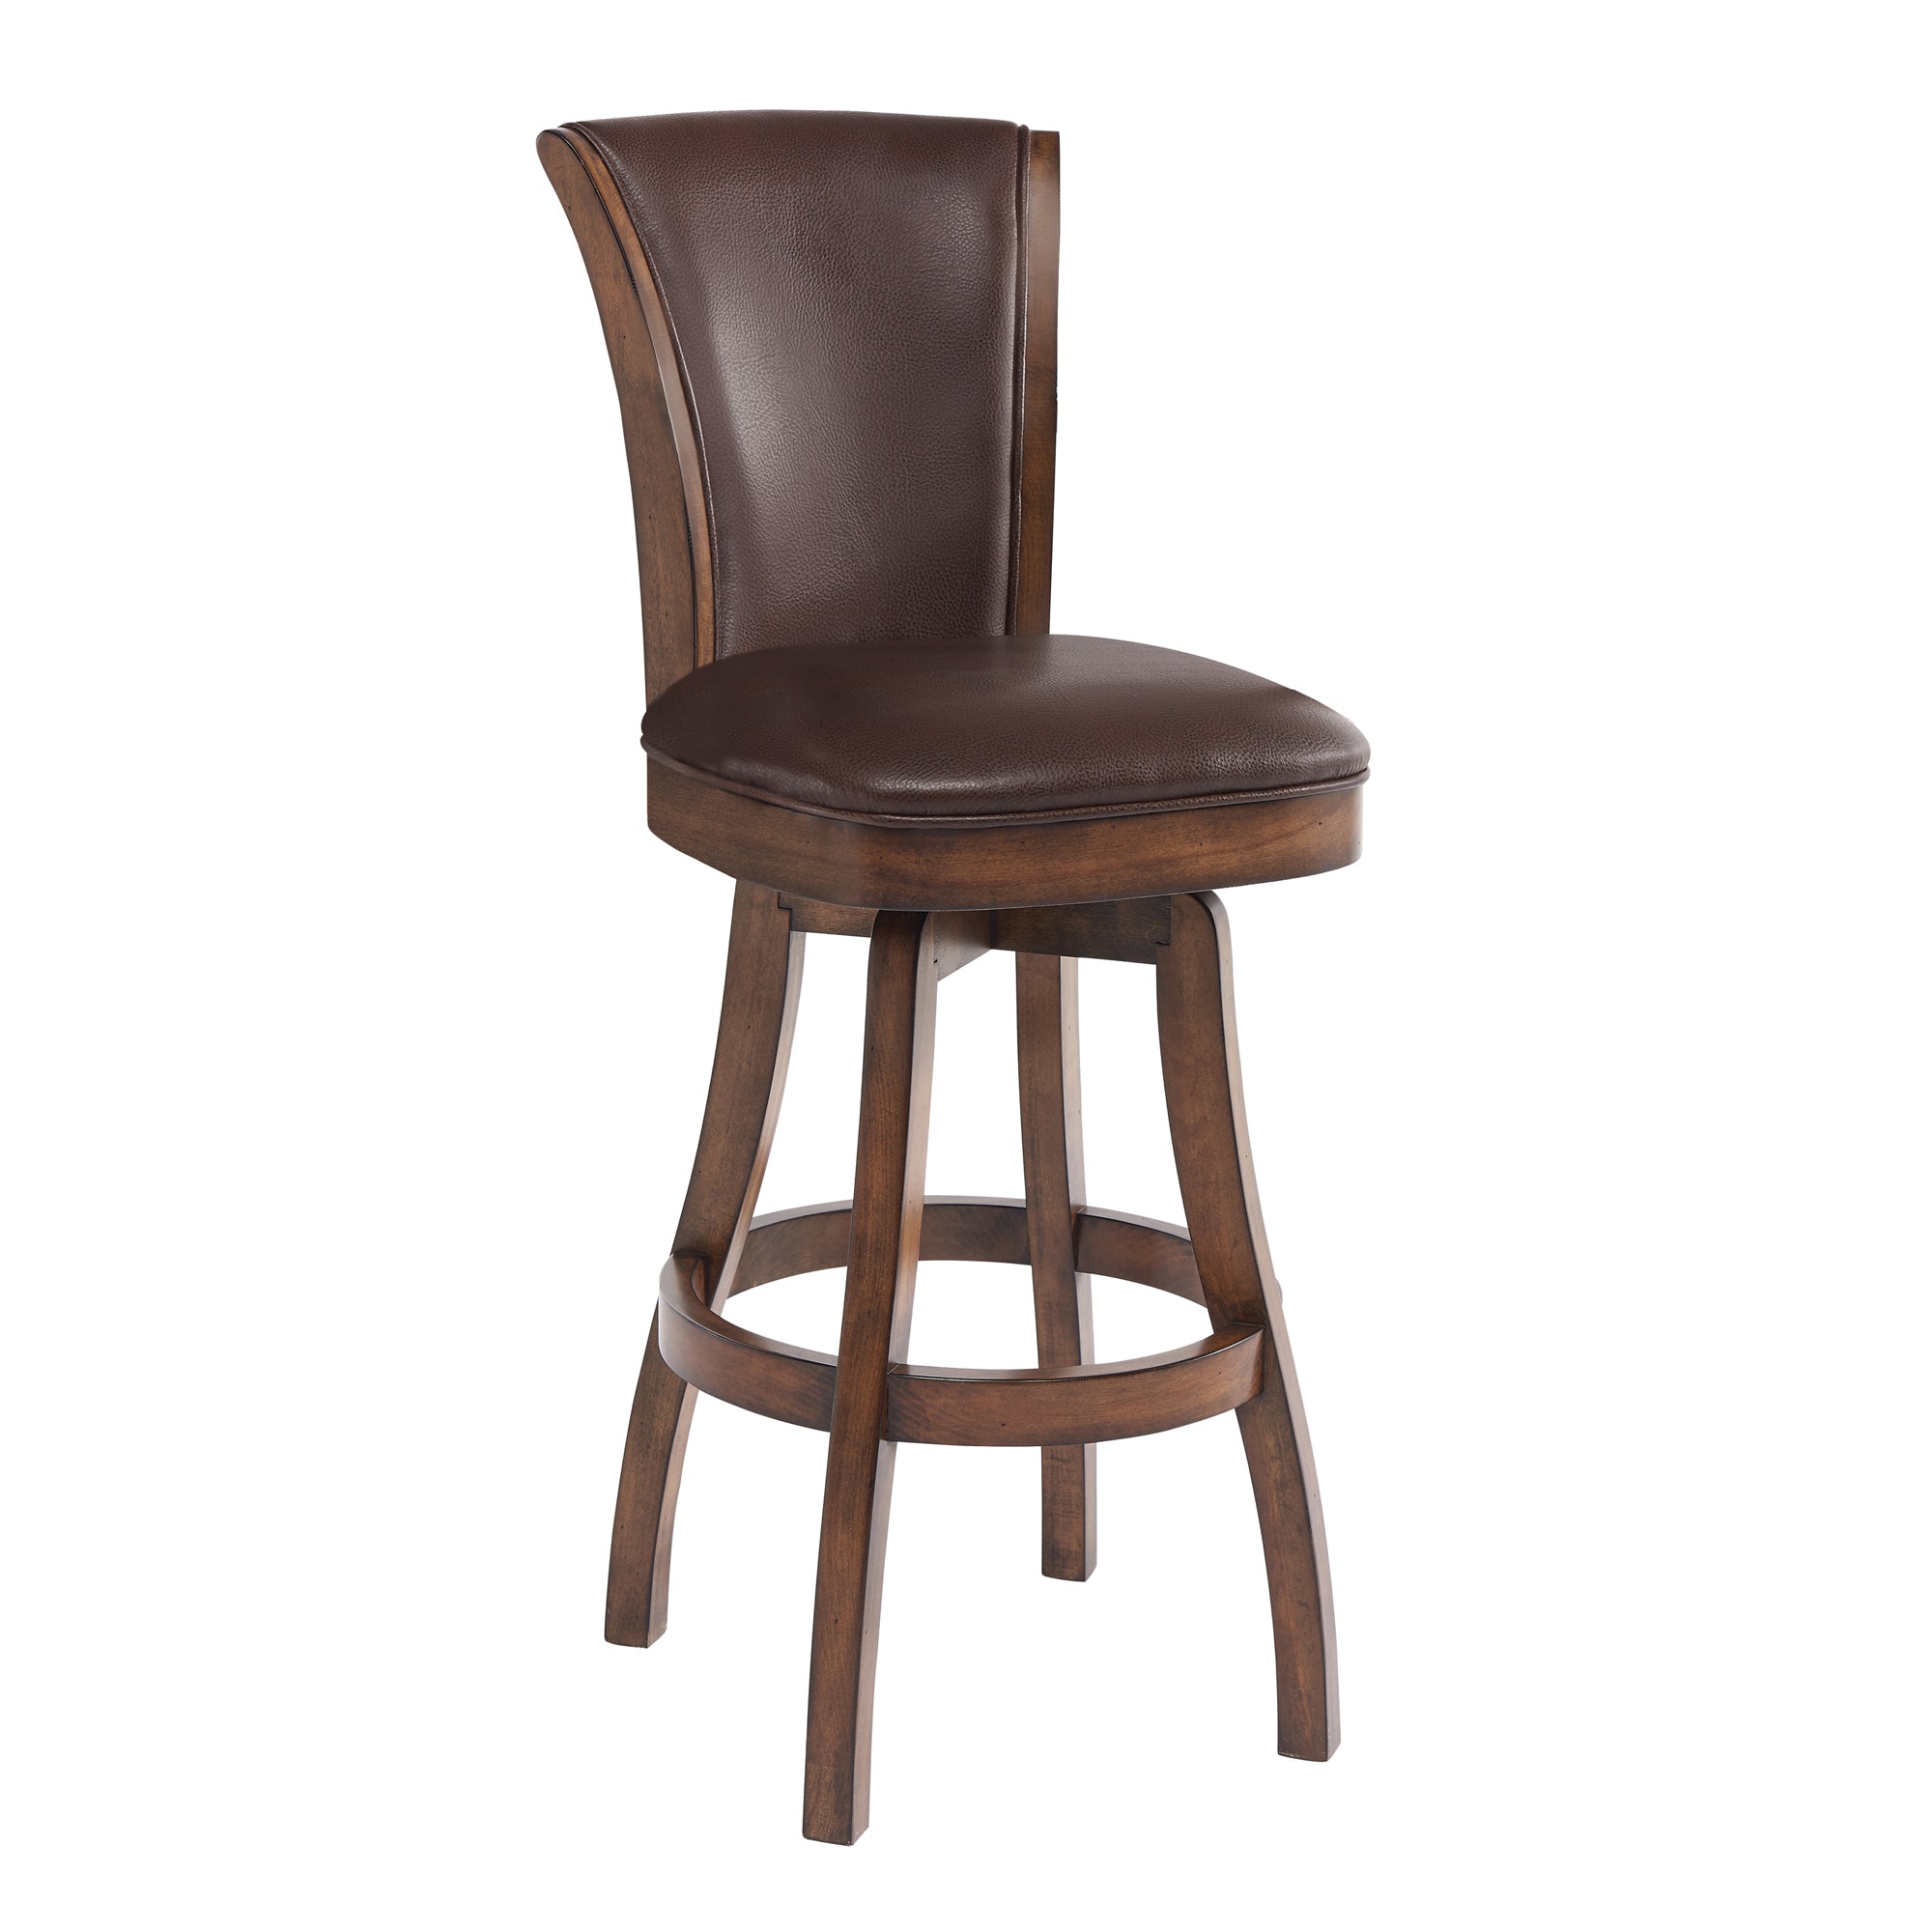 Armen Living Lcrabasikach26 Raleigh 26" Counter Height Swivel Wood Barstool In Chestnut Finish And Kahlua Faux Leather